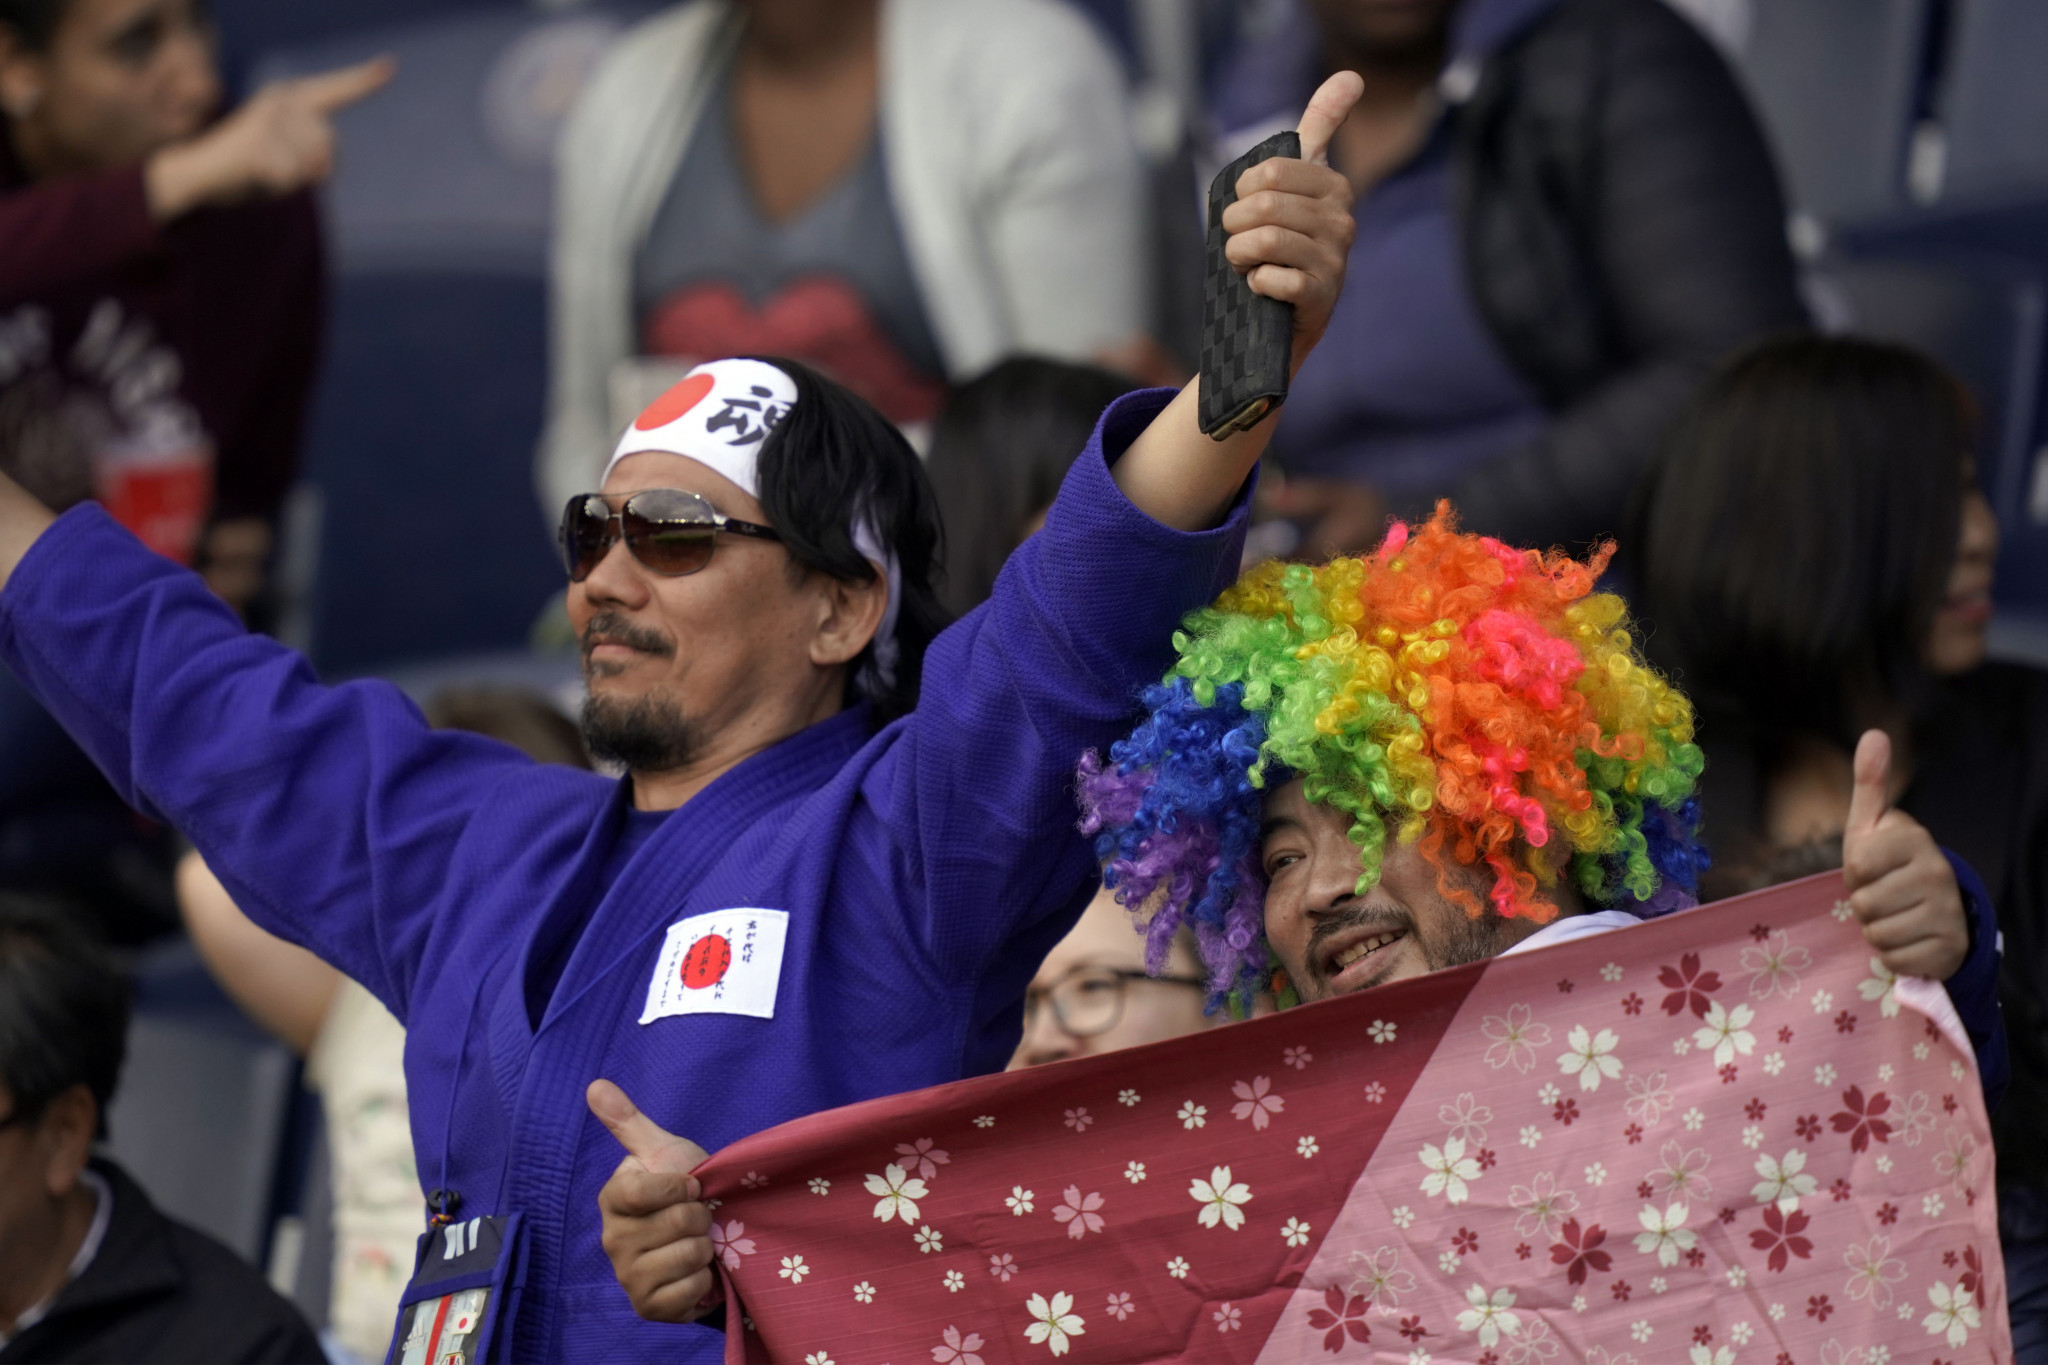 Japan's supporters got into the World Cup spirit to cheer on their team in Paris ©Getty Images 